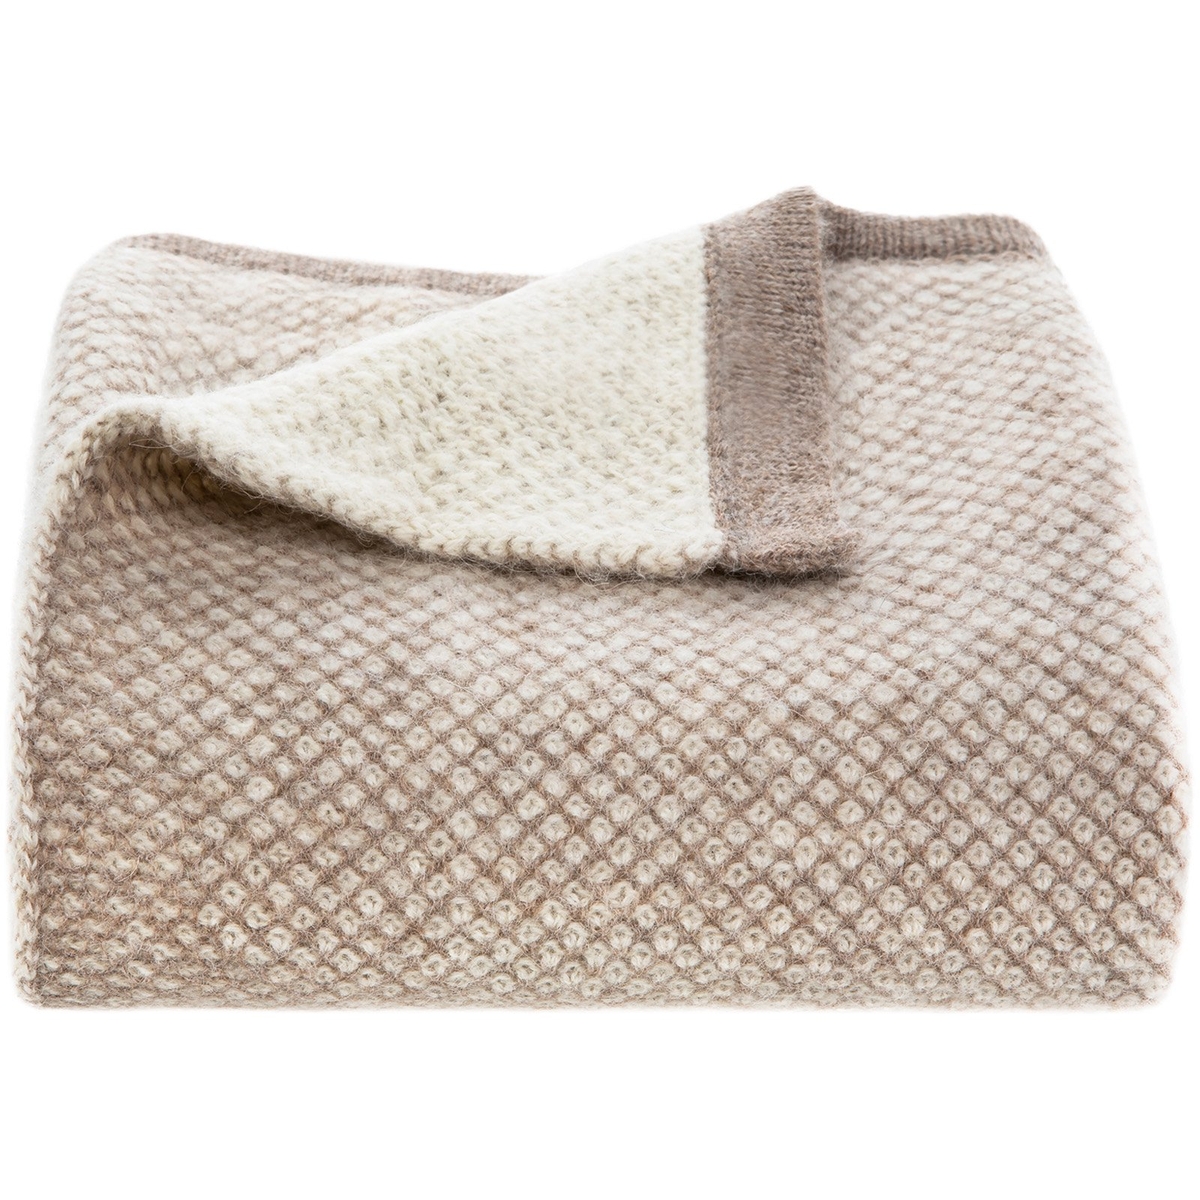 Qori Reversible Knitted Throw, Taupe